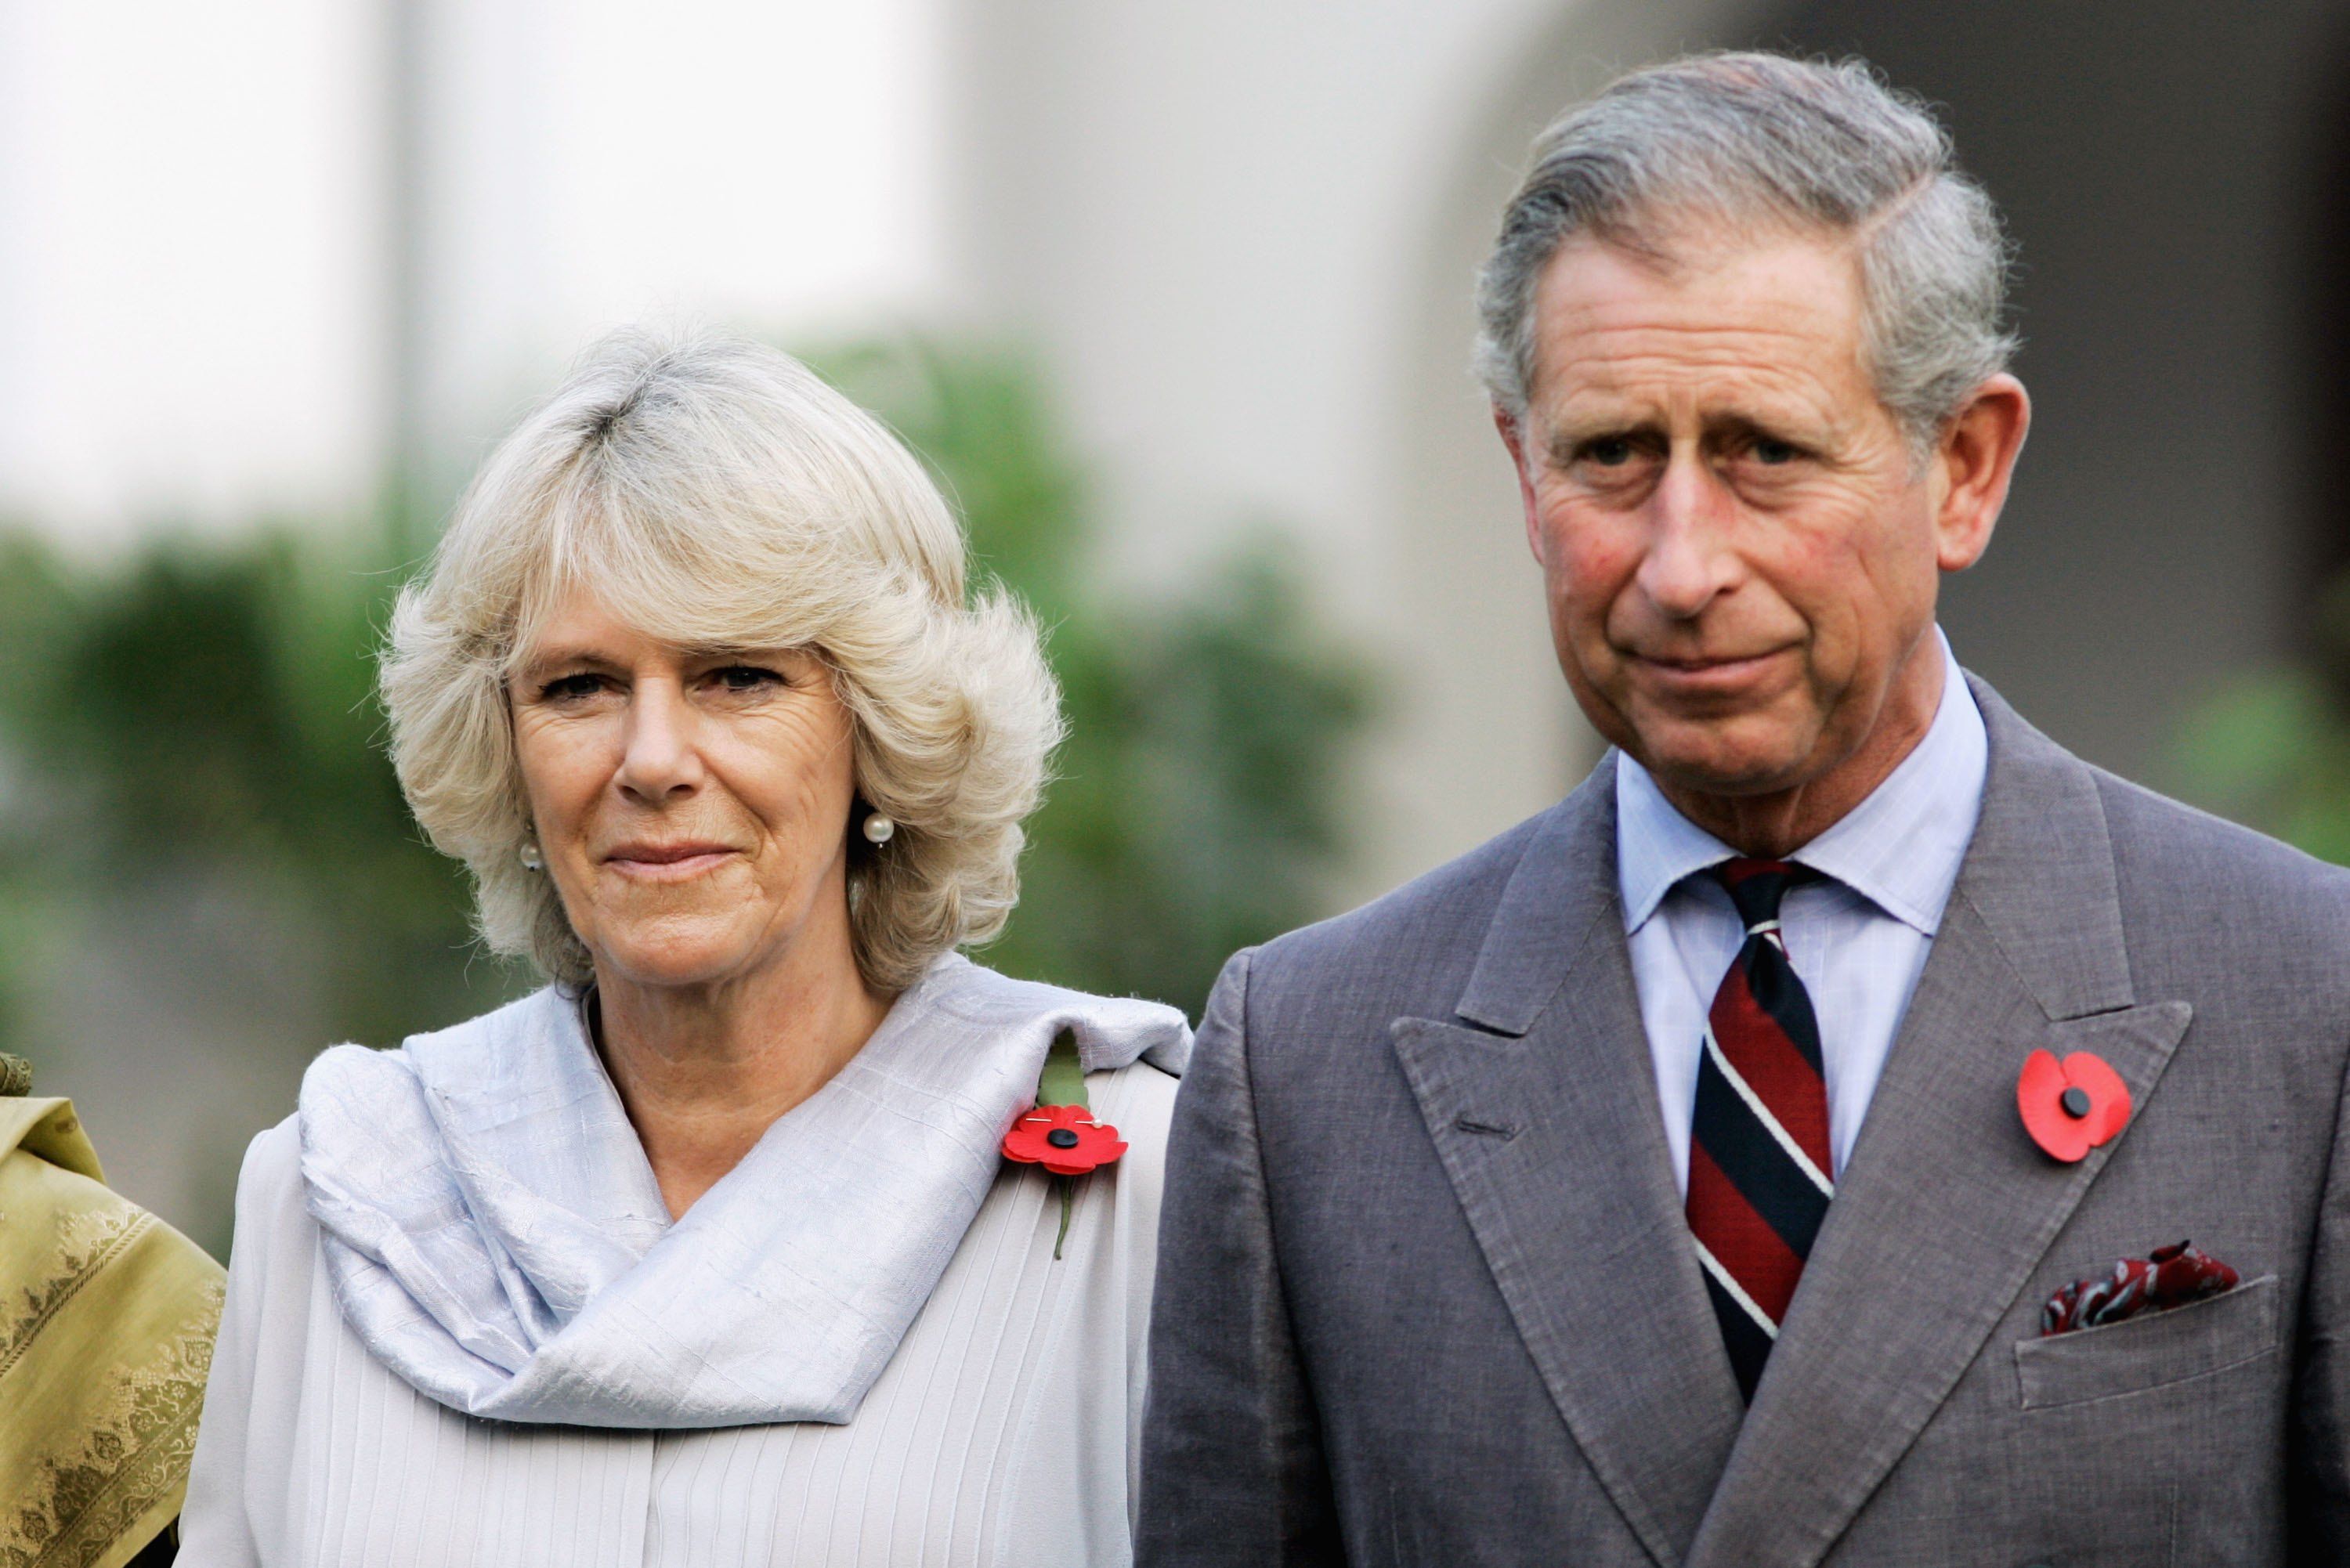 King Charles Iii Announced As New Title For Prince Charles, With Camilla As  Queen Consort